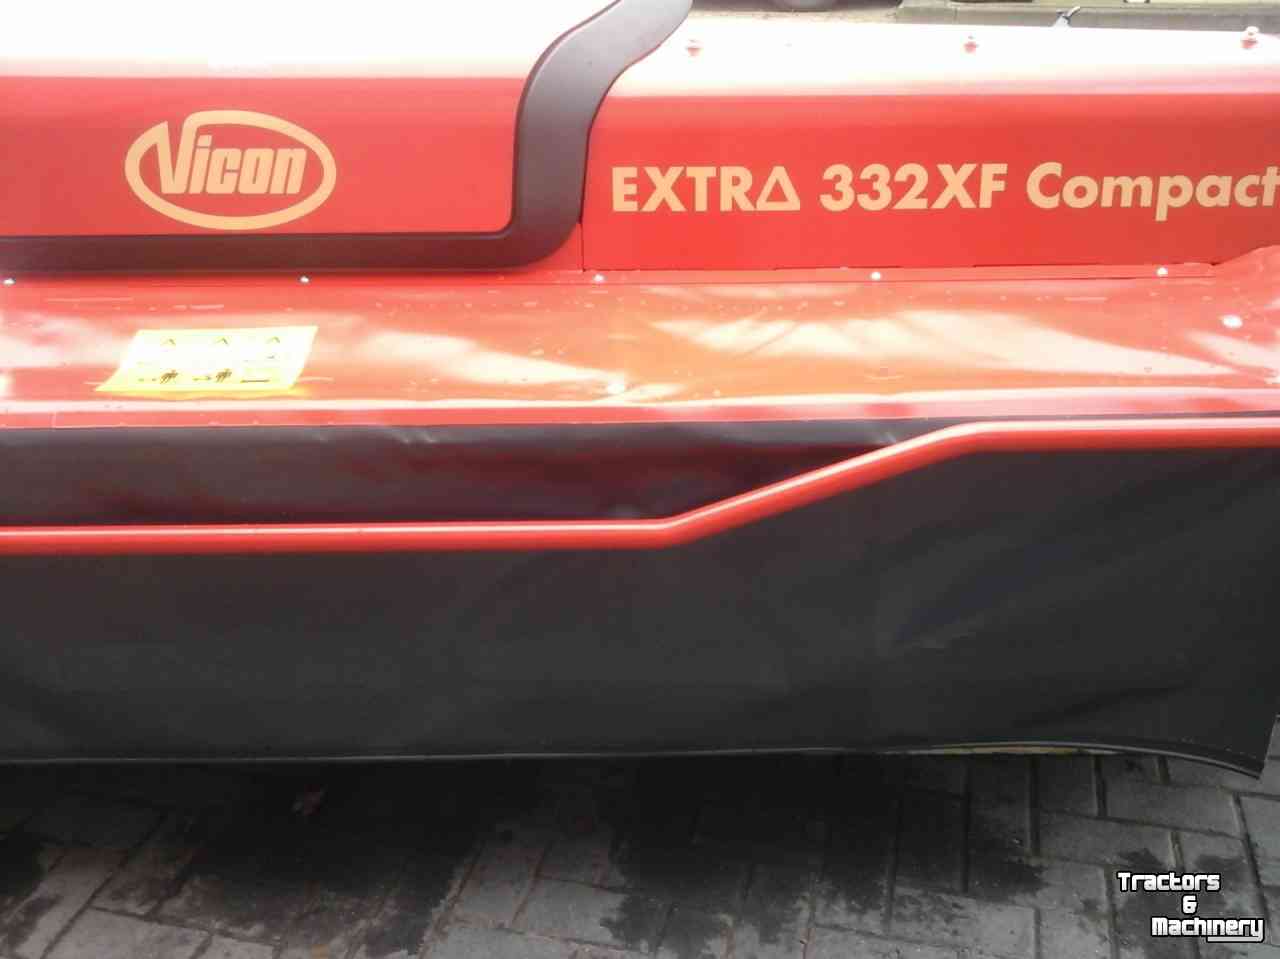 Mower Vicon Expres 332 XF Compact!!! FRONT!!